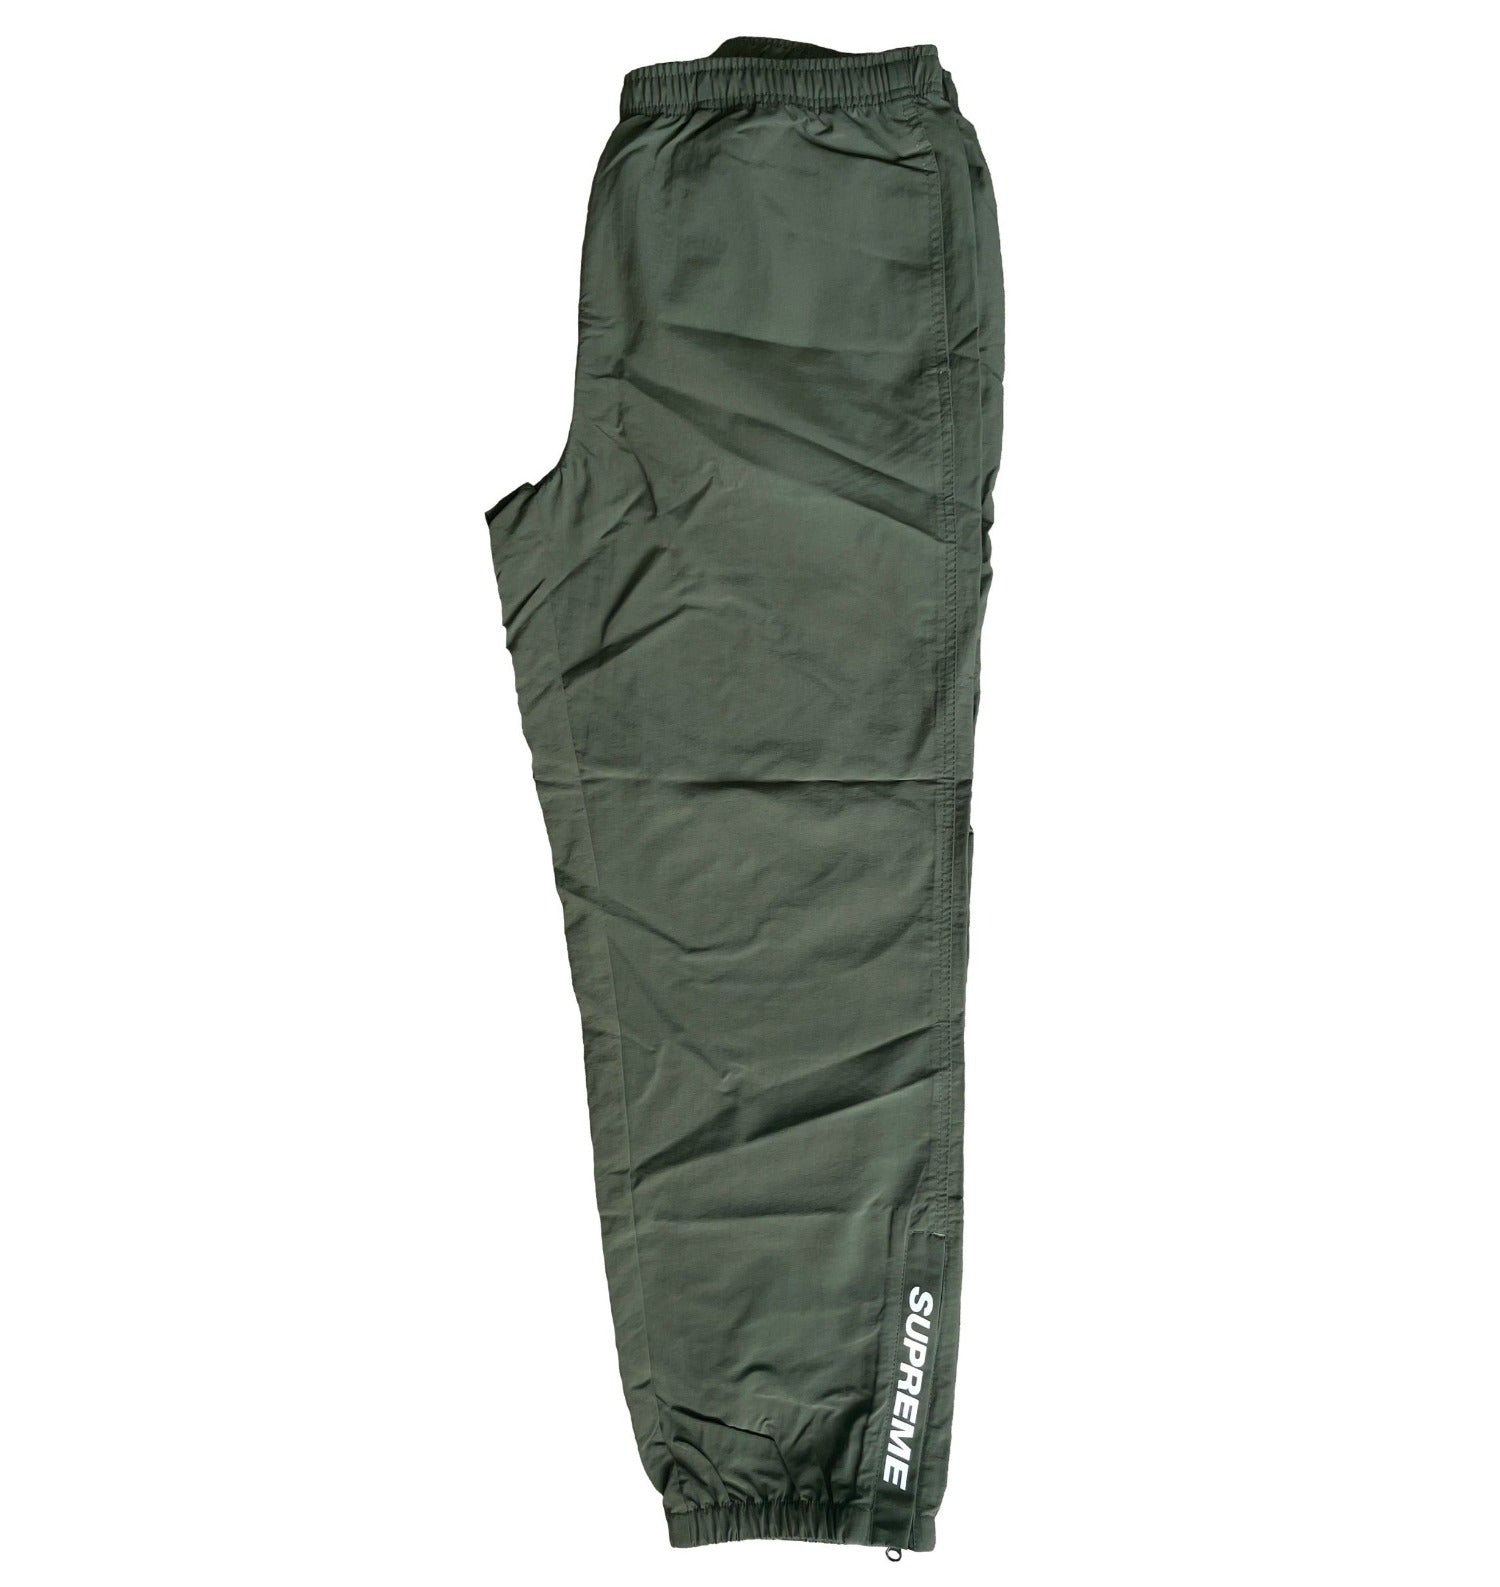 SLIM FIT! Supreme Warm Up Pant Size Small Olive FW21 Supreme New York 2021